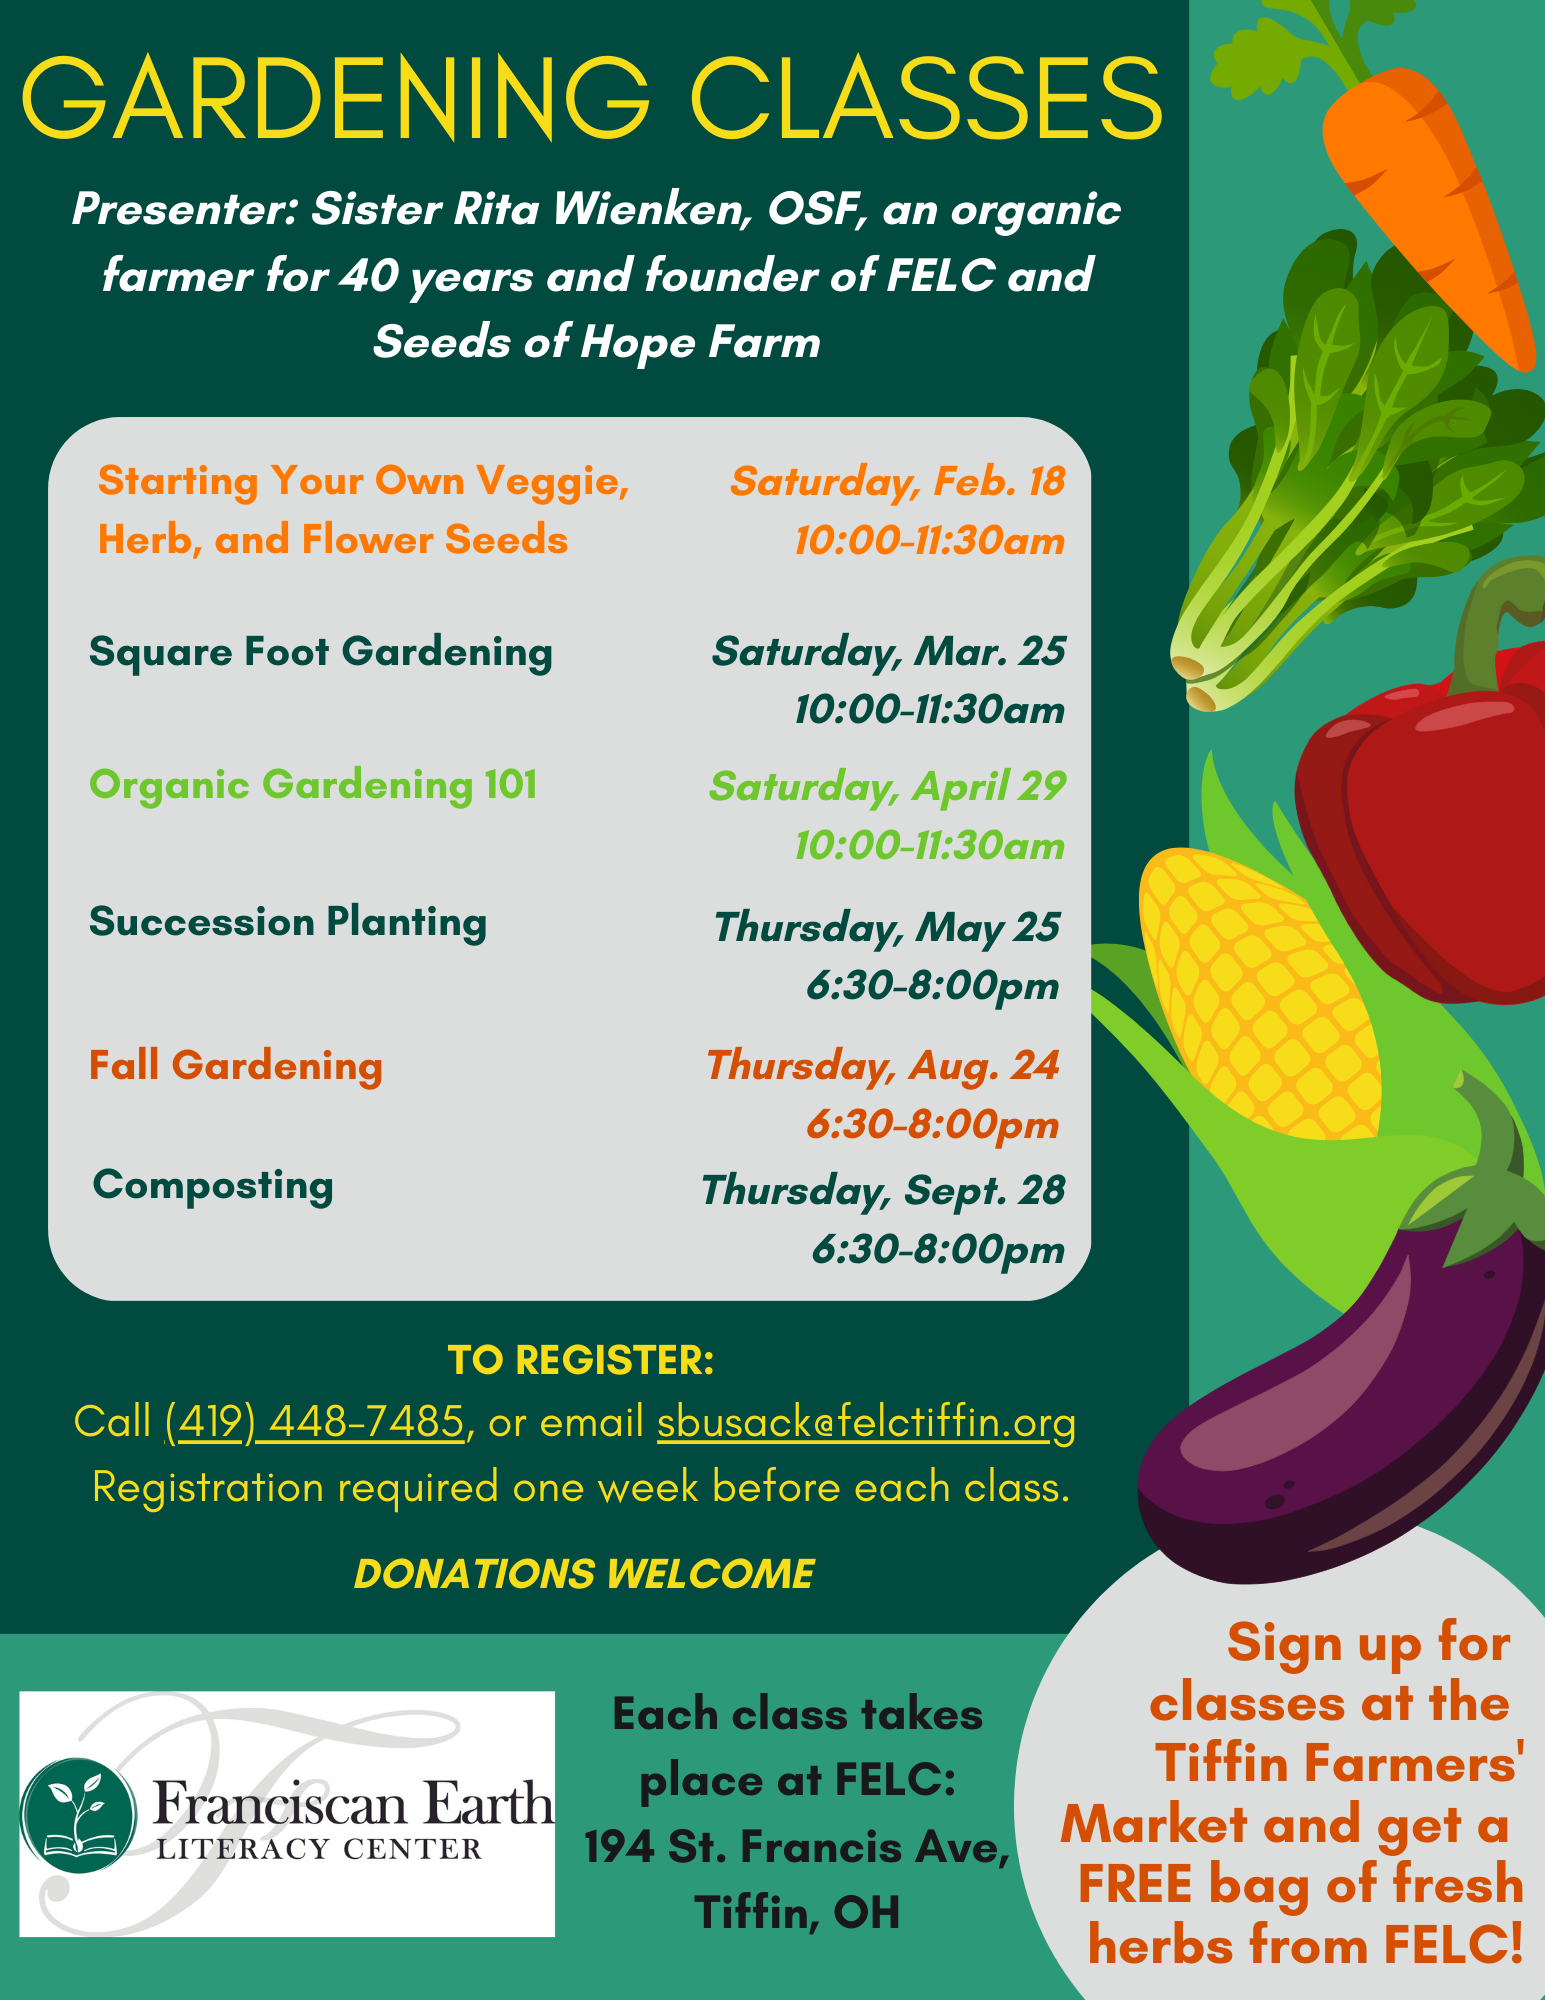 Franciscan Earth Literacy Center | Square Foot Gardening